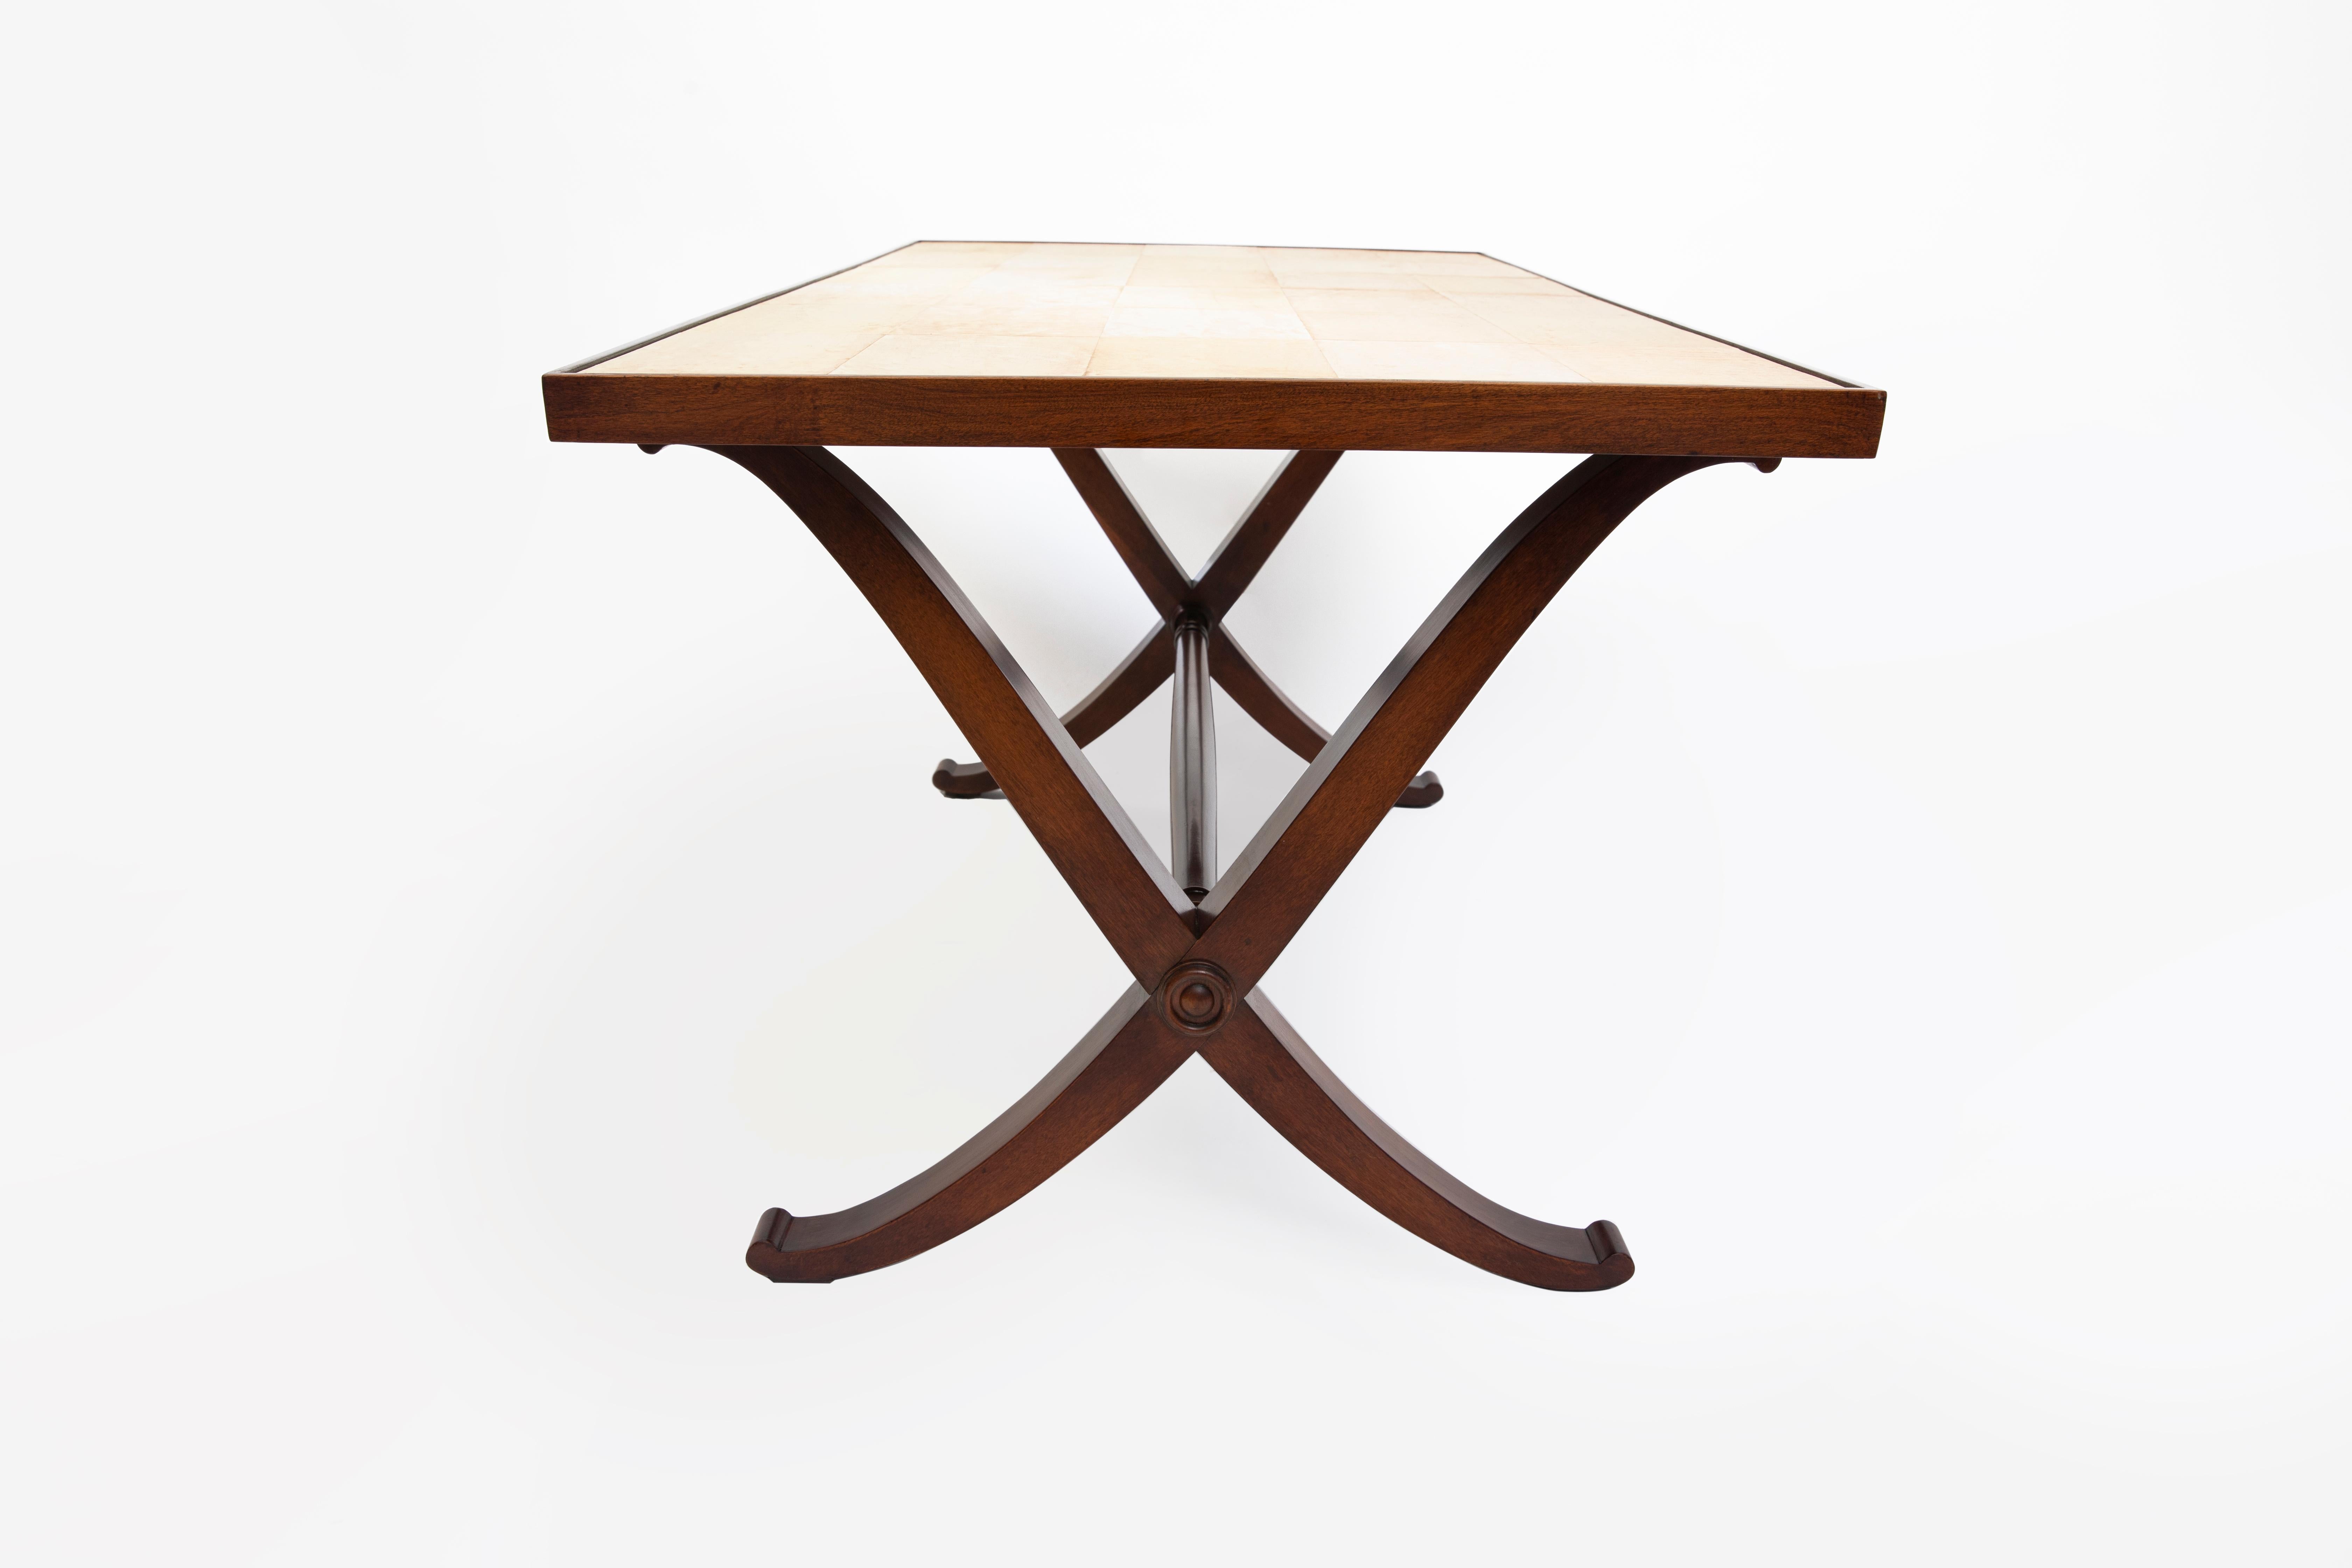 Wood and parchment low table by Comte, Argentina, Buenos Aires, circa 1950.